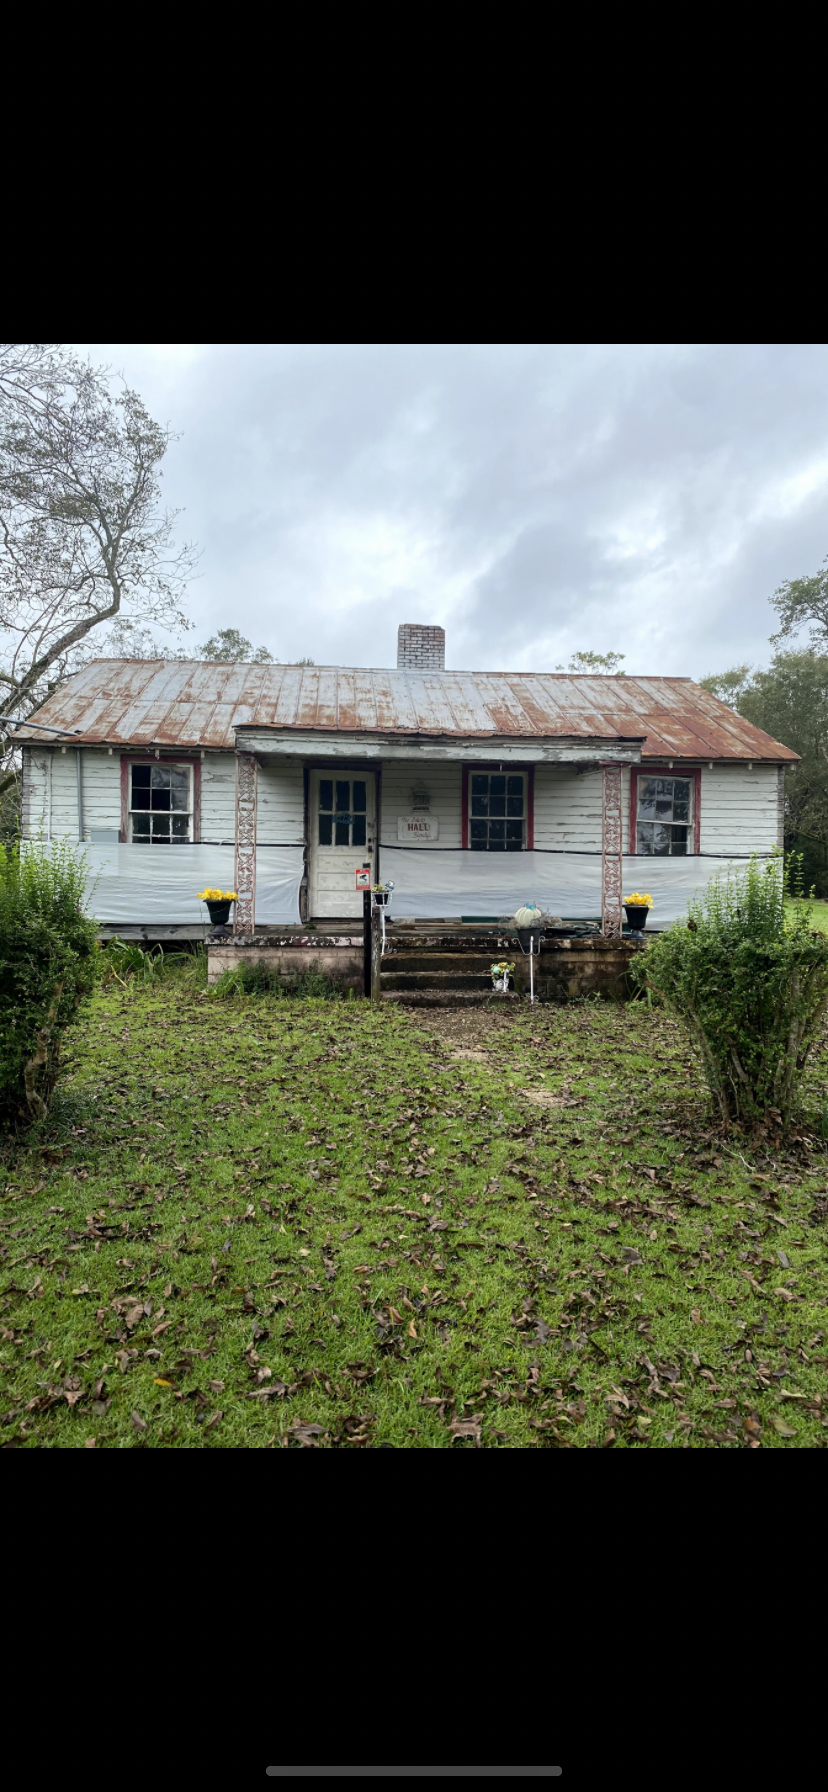 An image of the David Hall Home, located along the Selma to Montgomery National Historic Trail in Alabama.